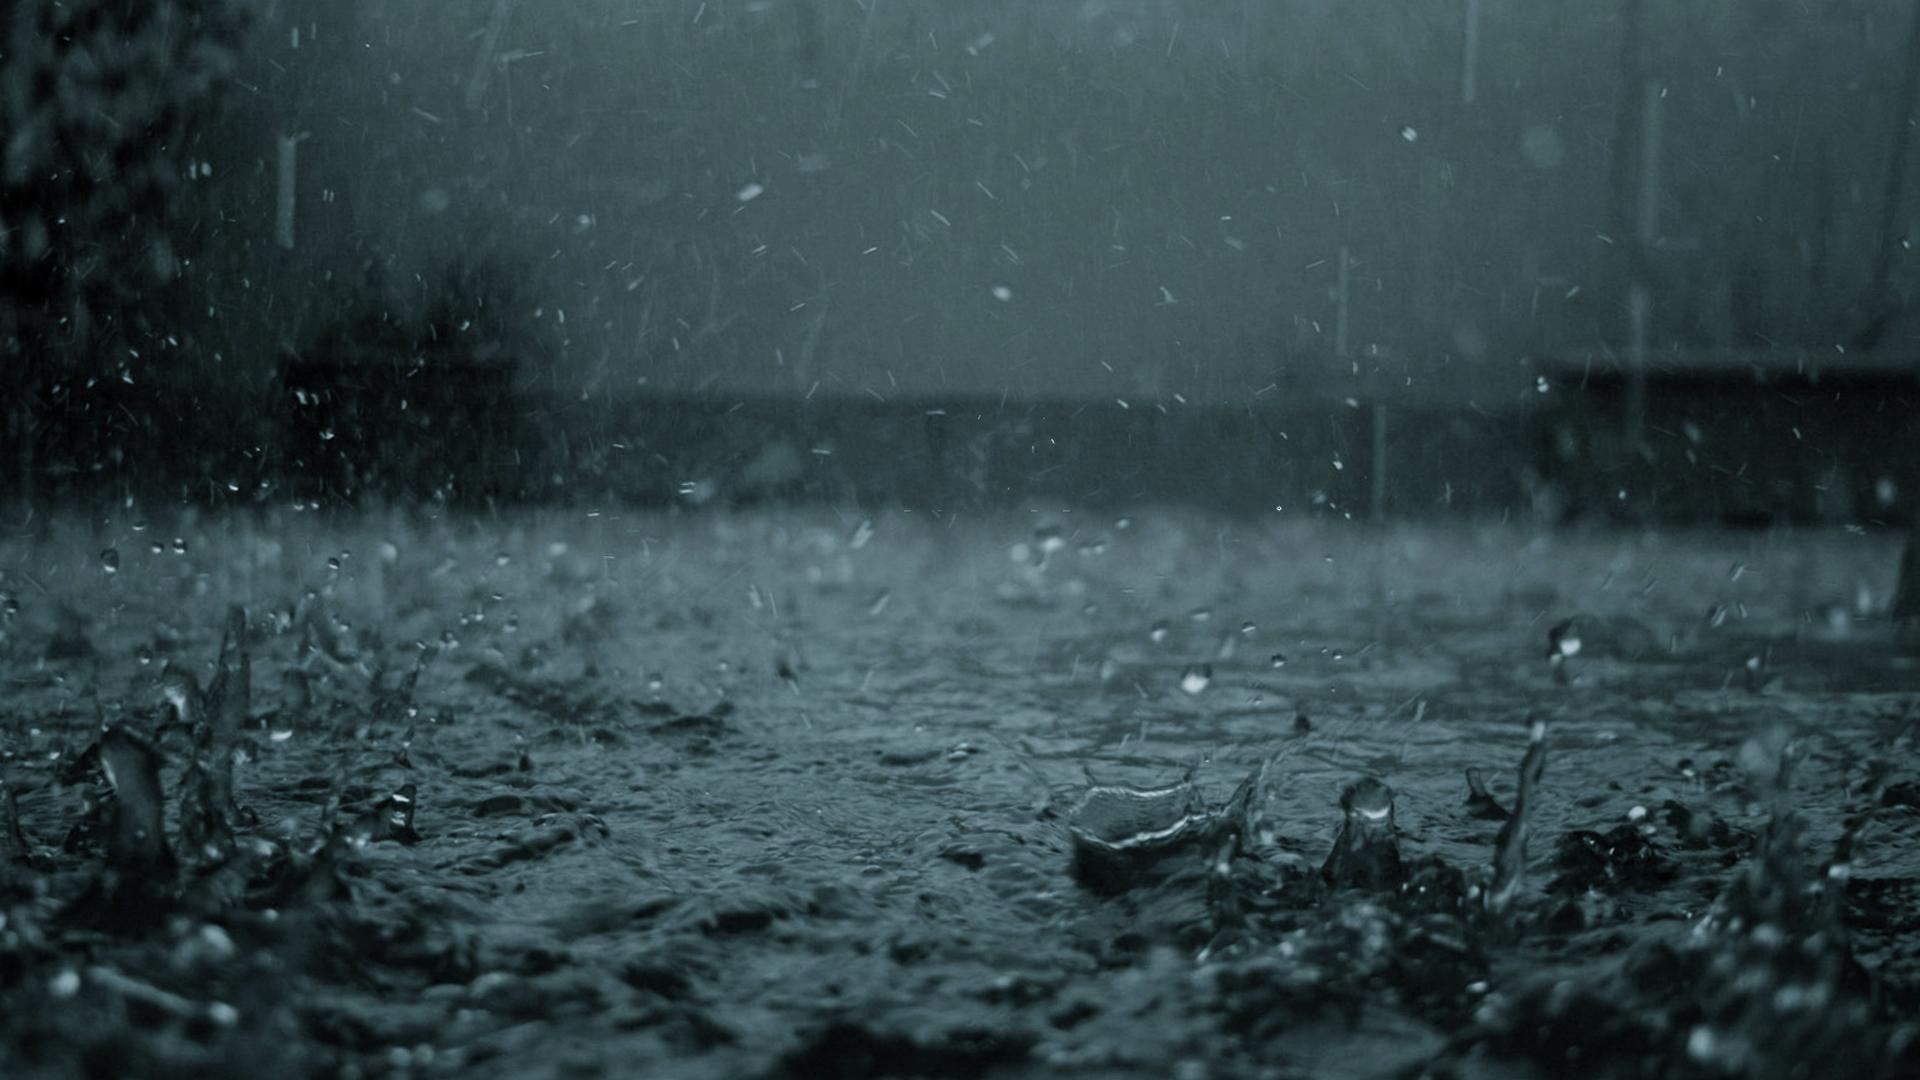 Rainy Nature HD Wallpaper, Rainy Nature Images | Cool Wallpapers